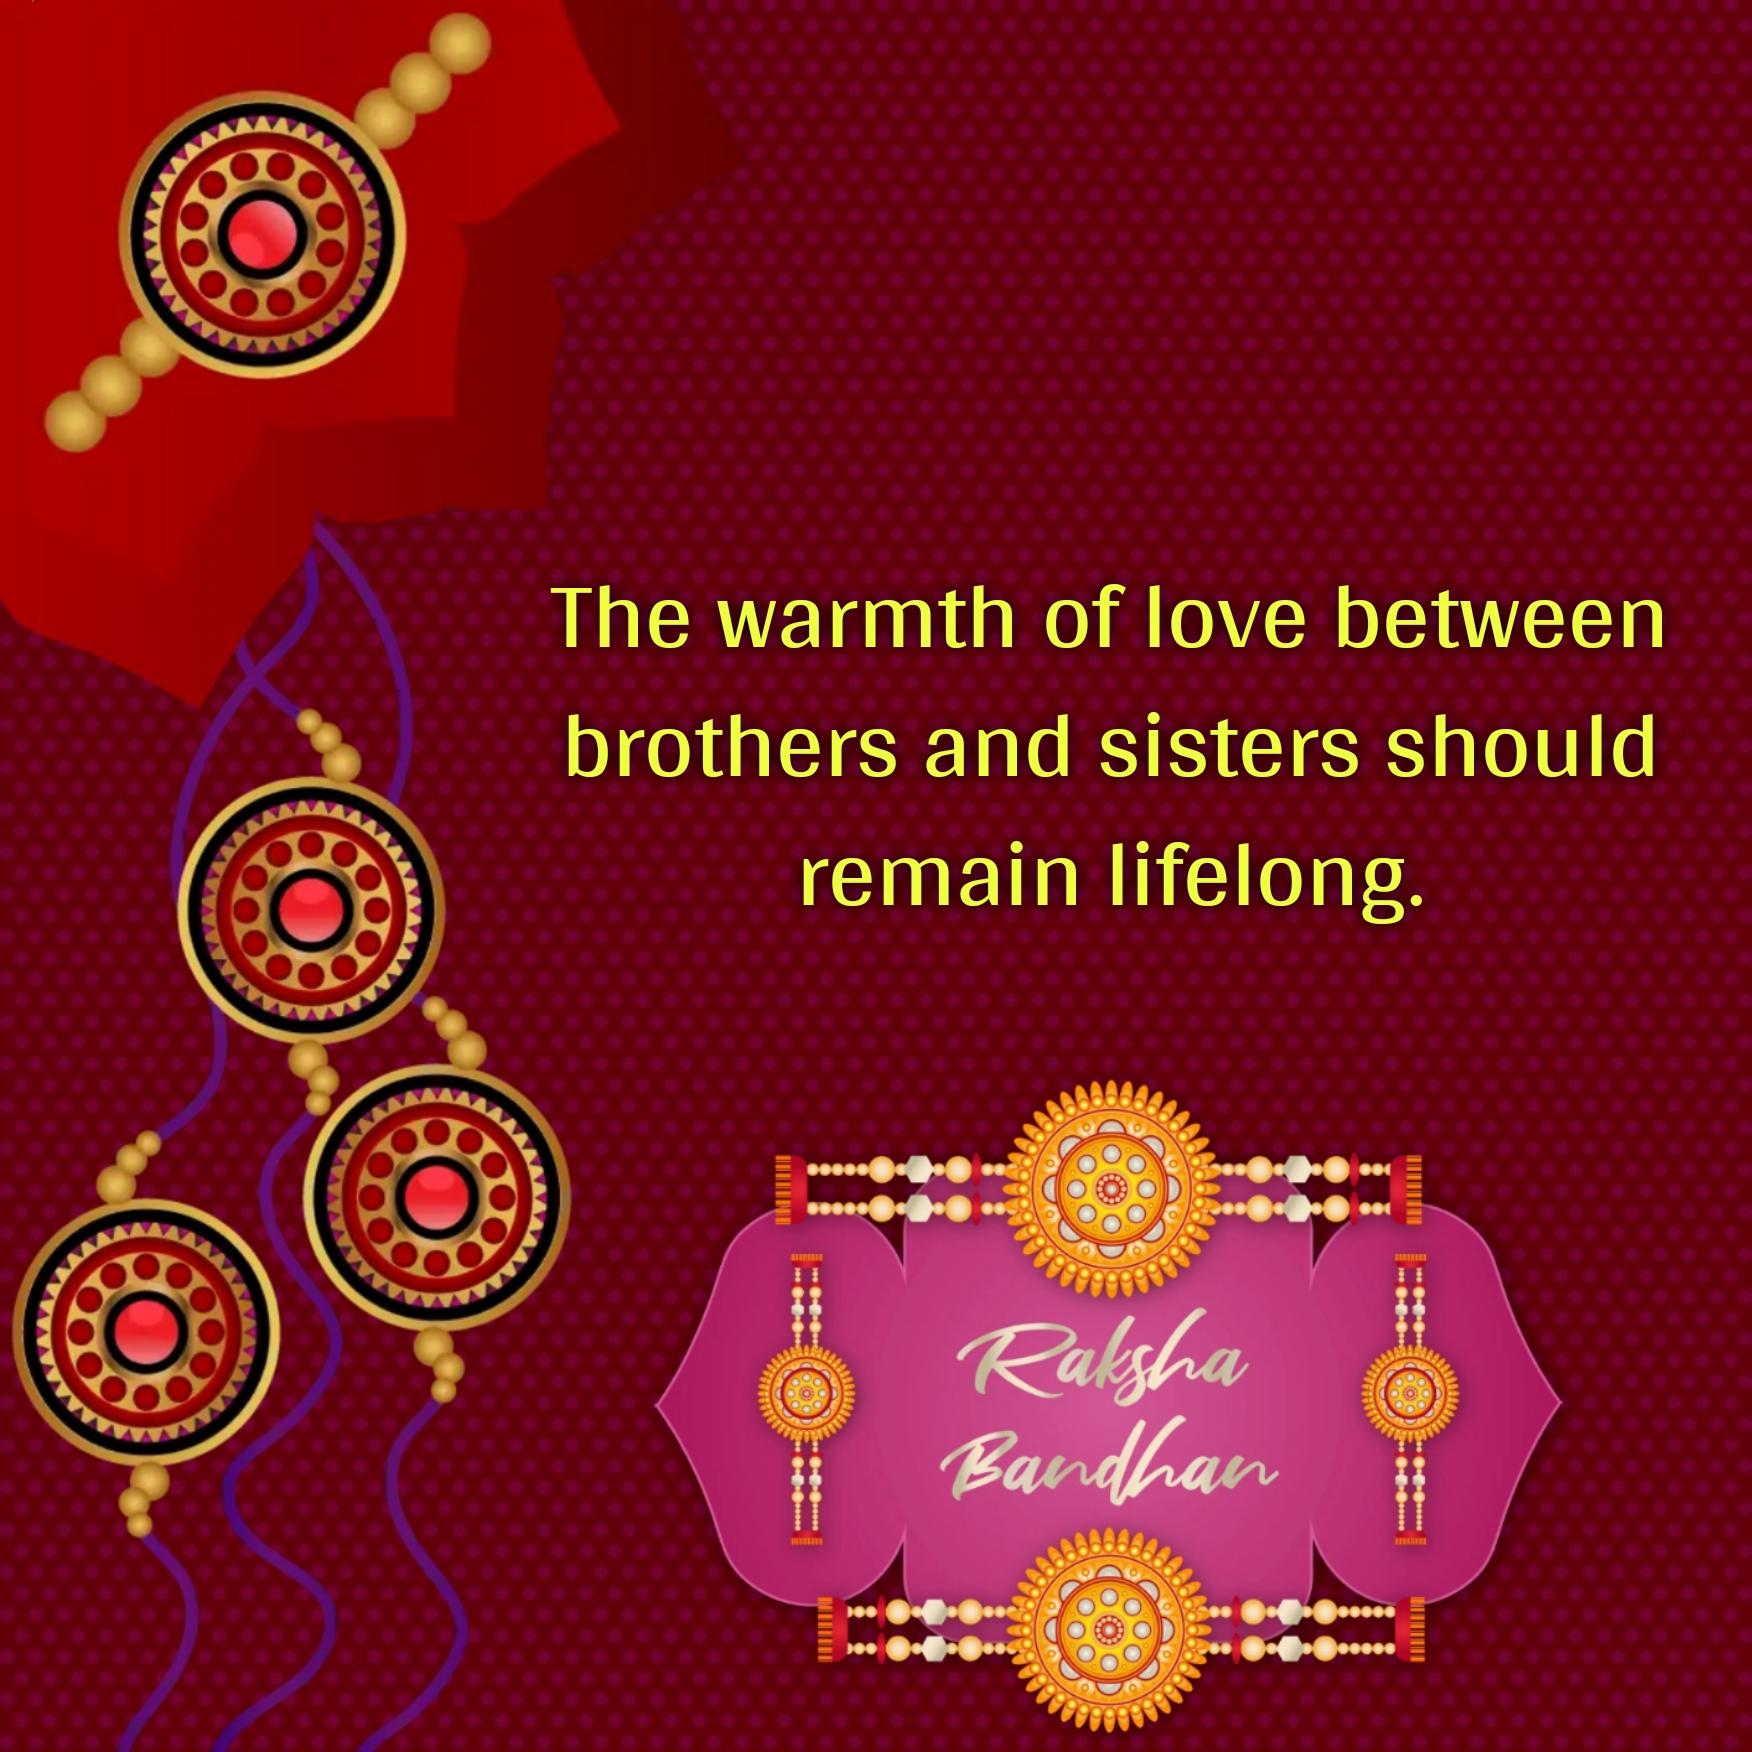 The warmth of love between brothers and sisters should remain lifelong